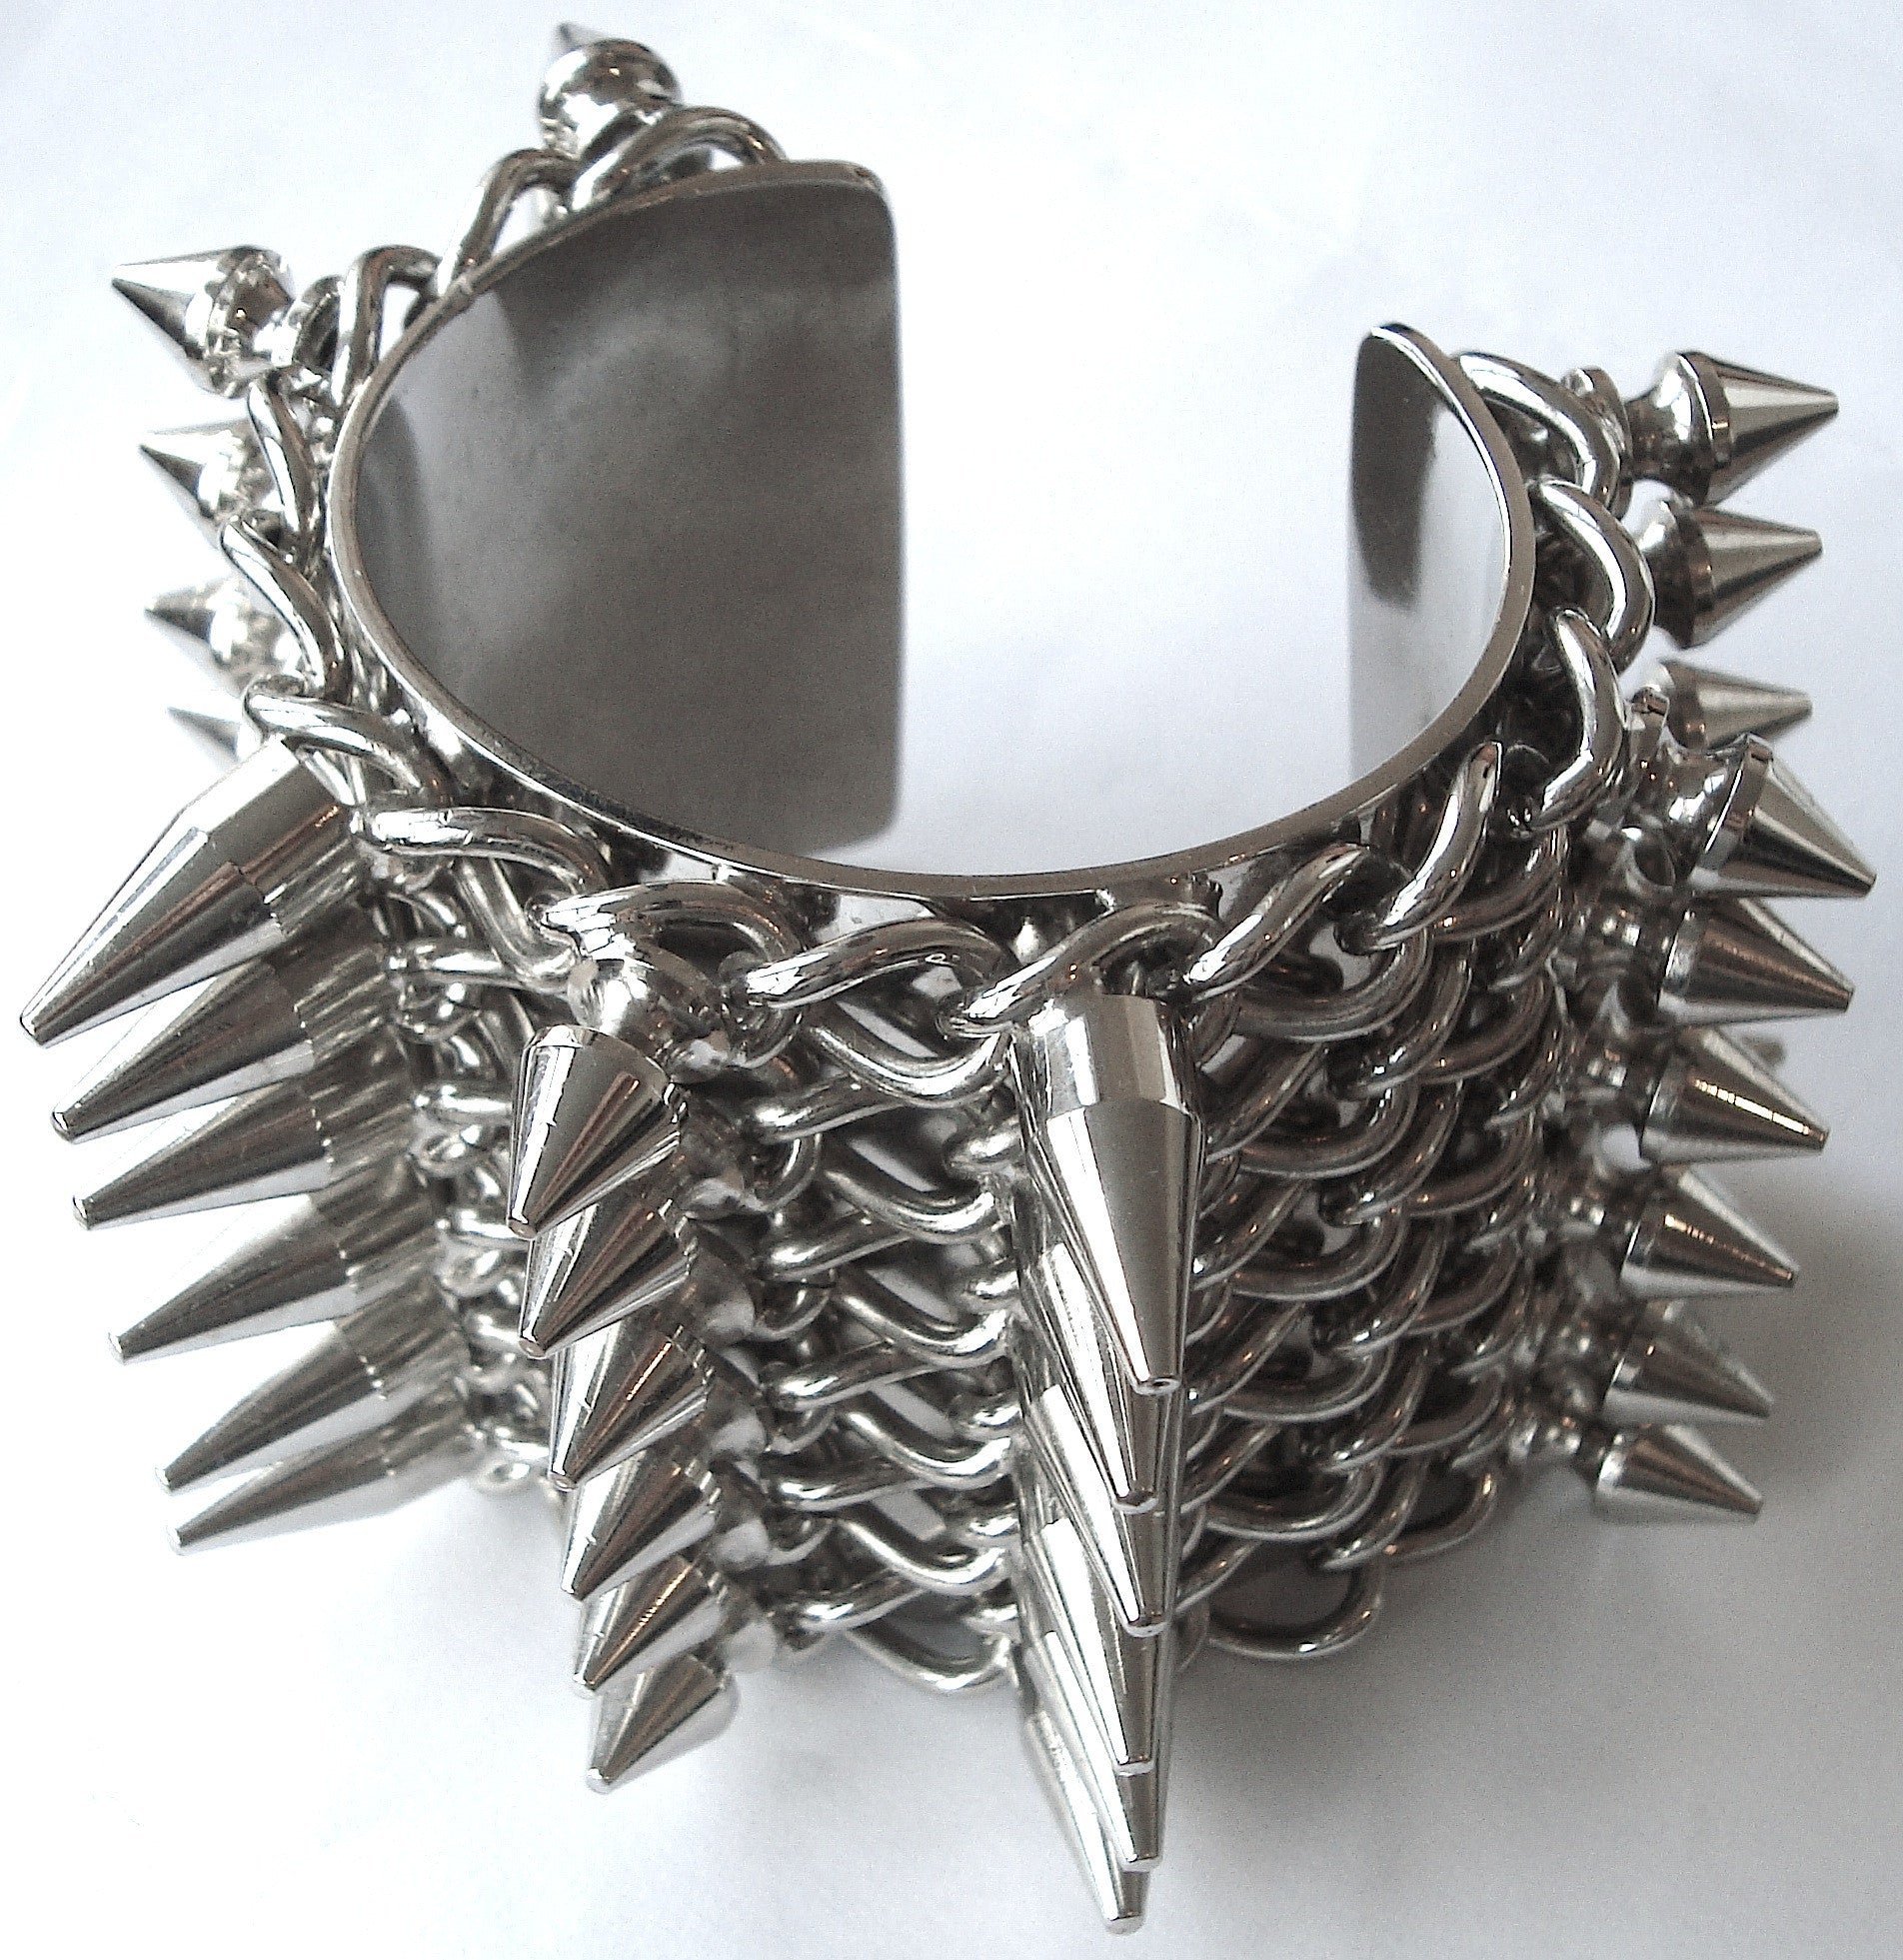 2011 Heavy Punk Bracelet with Spike Studs and Chains